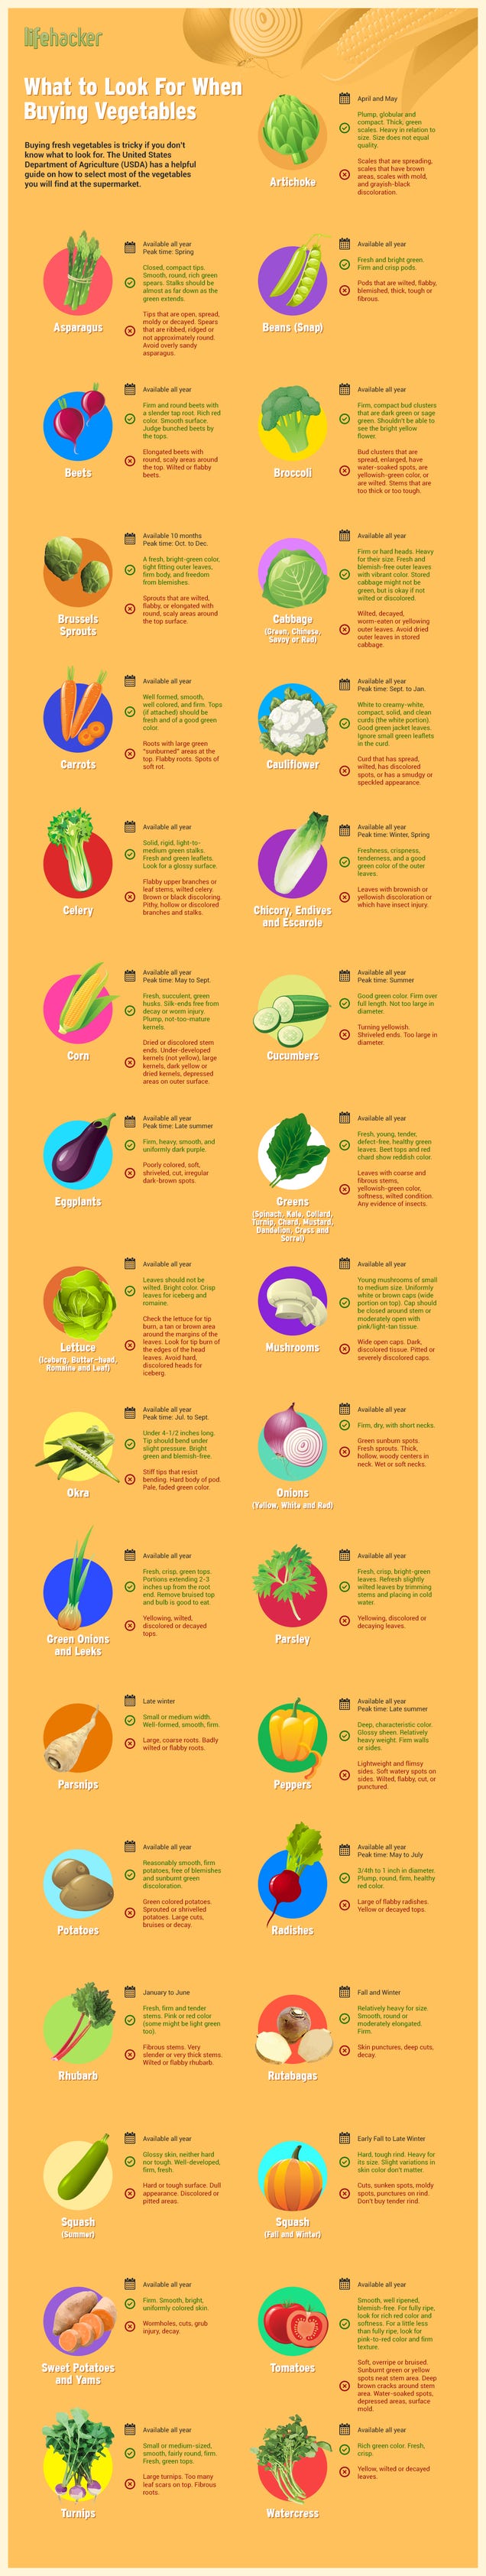 This Infographic Tells You What to Look For When Buying Vegetables